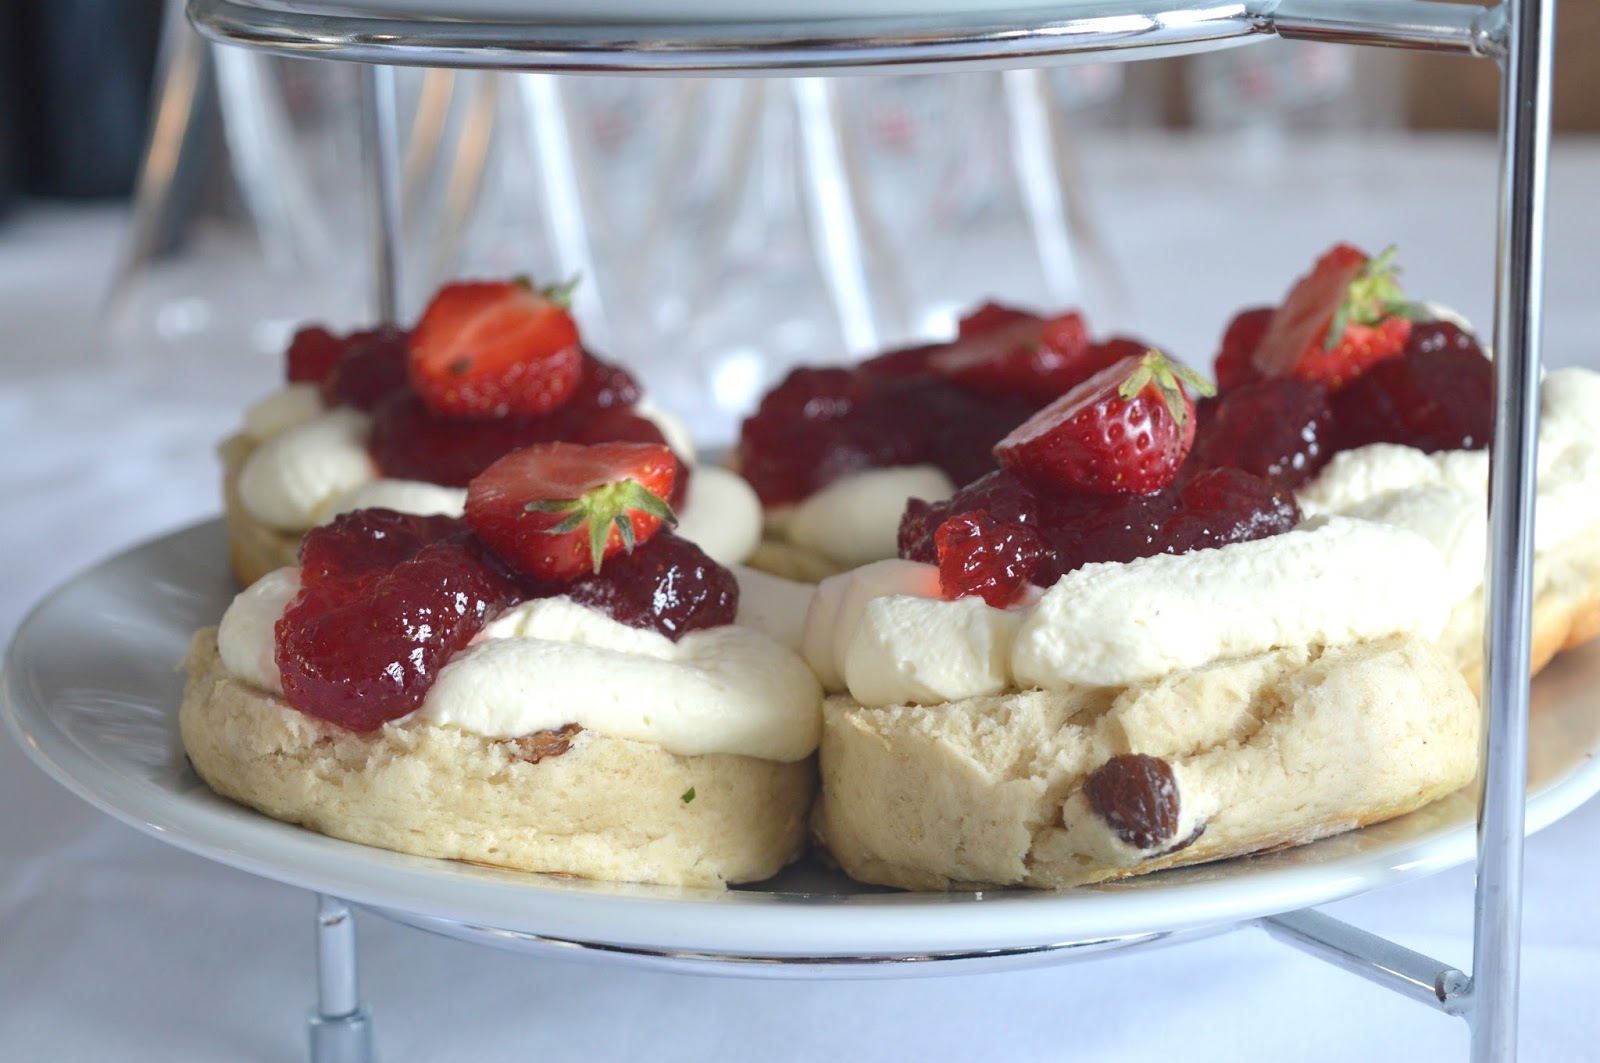 10 Reasons Why I LOVE Afternoon Tea - Scones